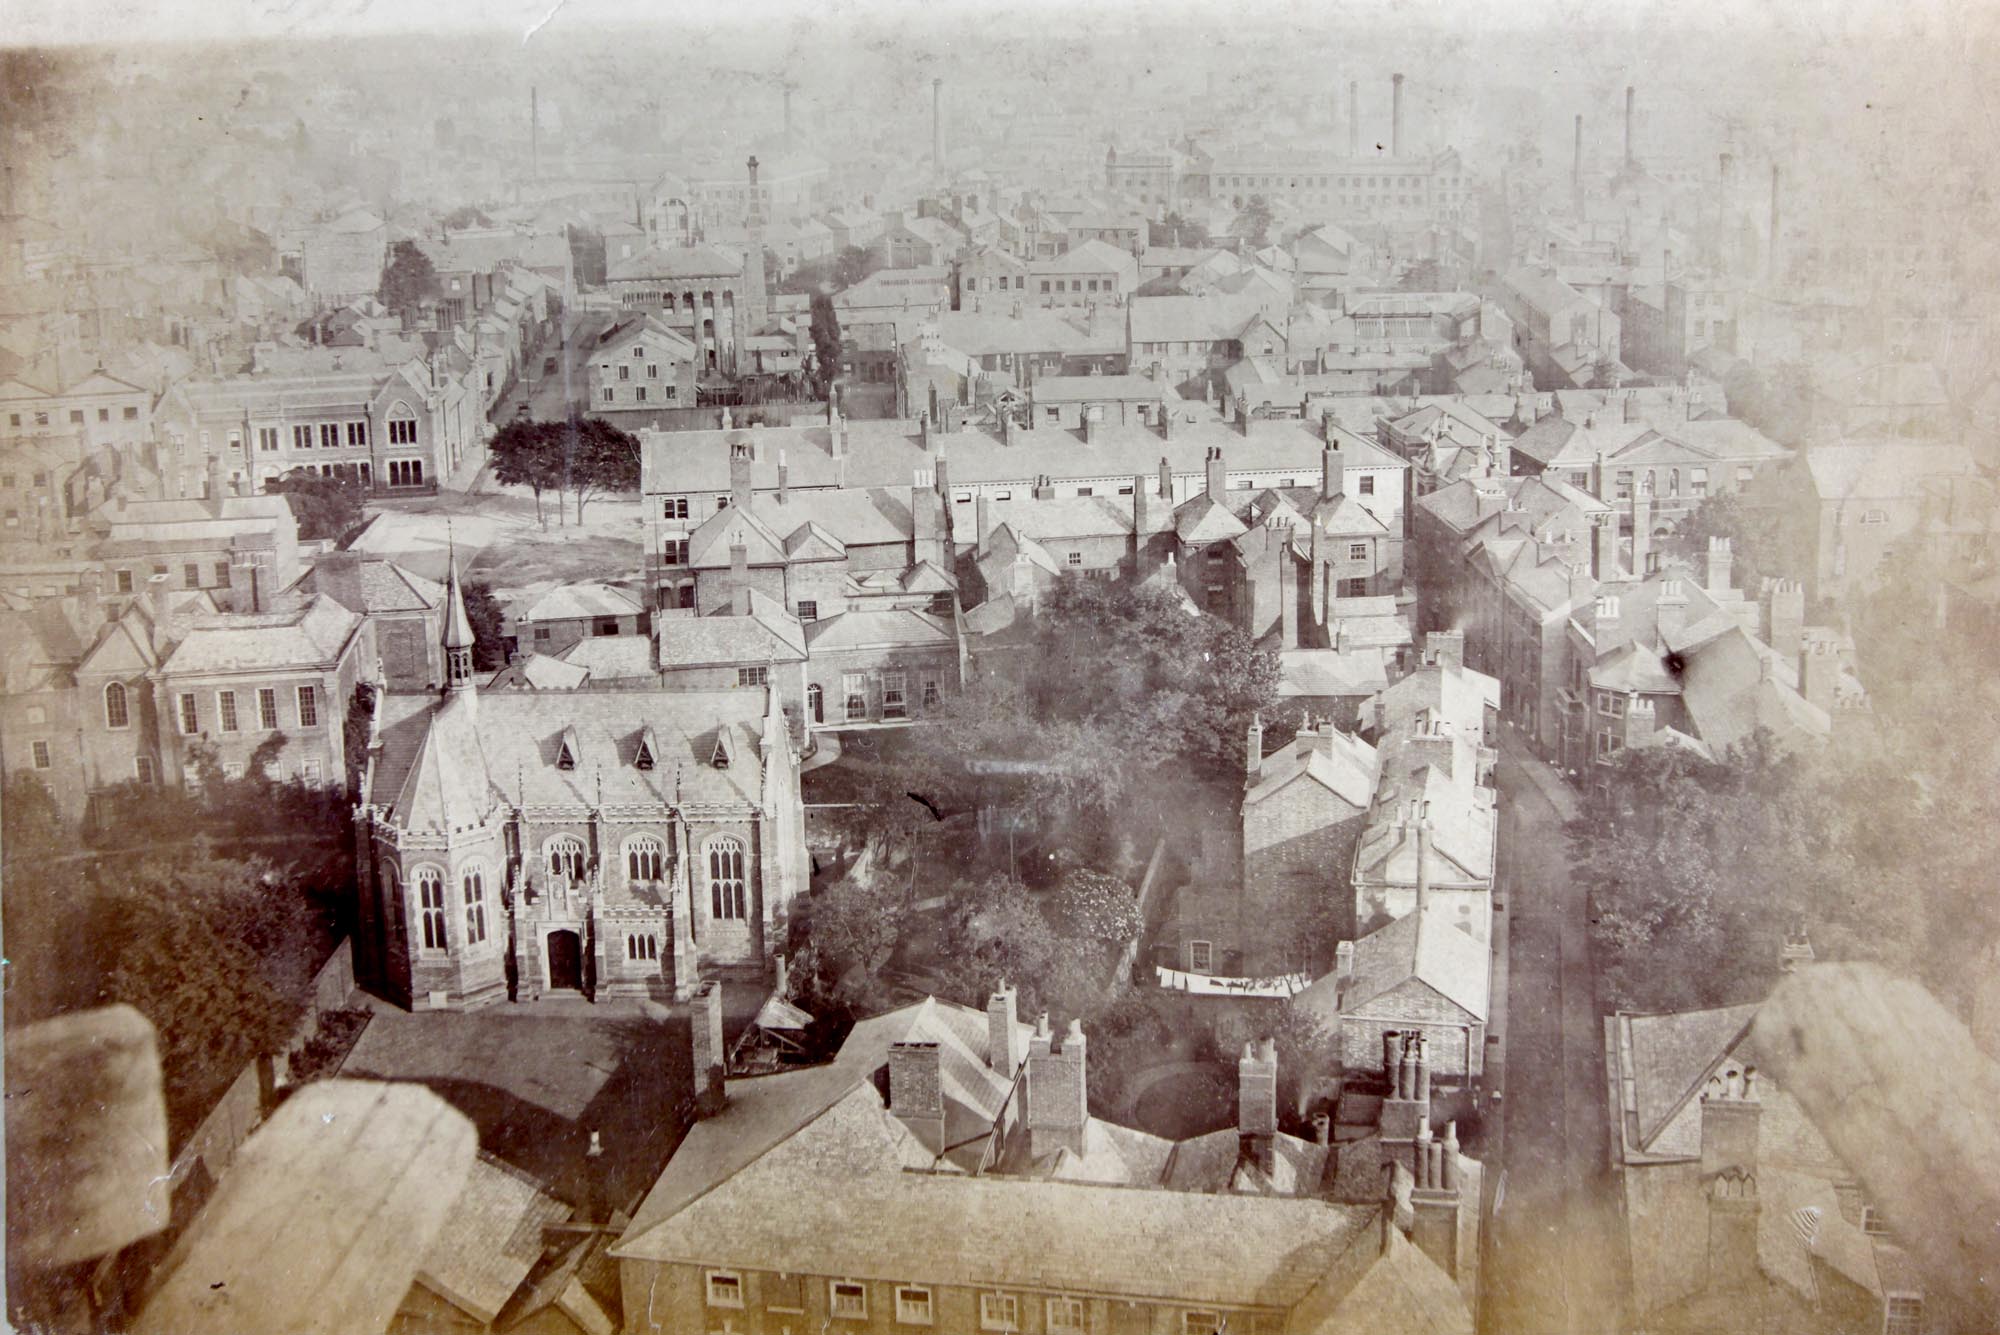 The Grey Friars site from St Martin’s steeple in 1867, looking south. In the foreground is the Alderman Newton’s School (today the Richard III Visitor Centre) before it was extended in 1887 and 1897. Richard III’s grave was found in the garden to the right of the school - Leicester Record Office